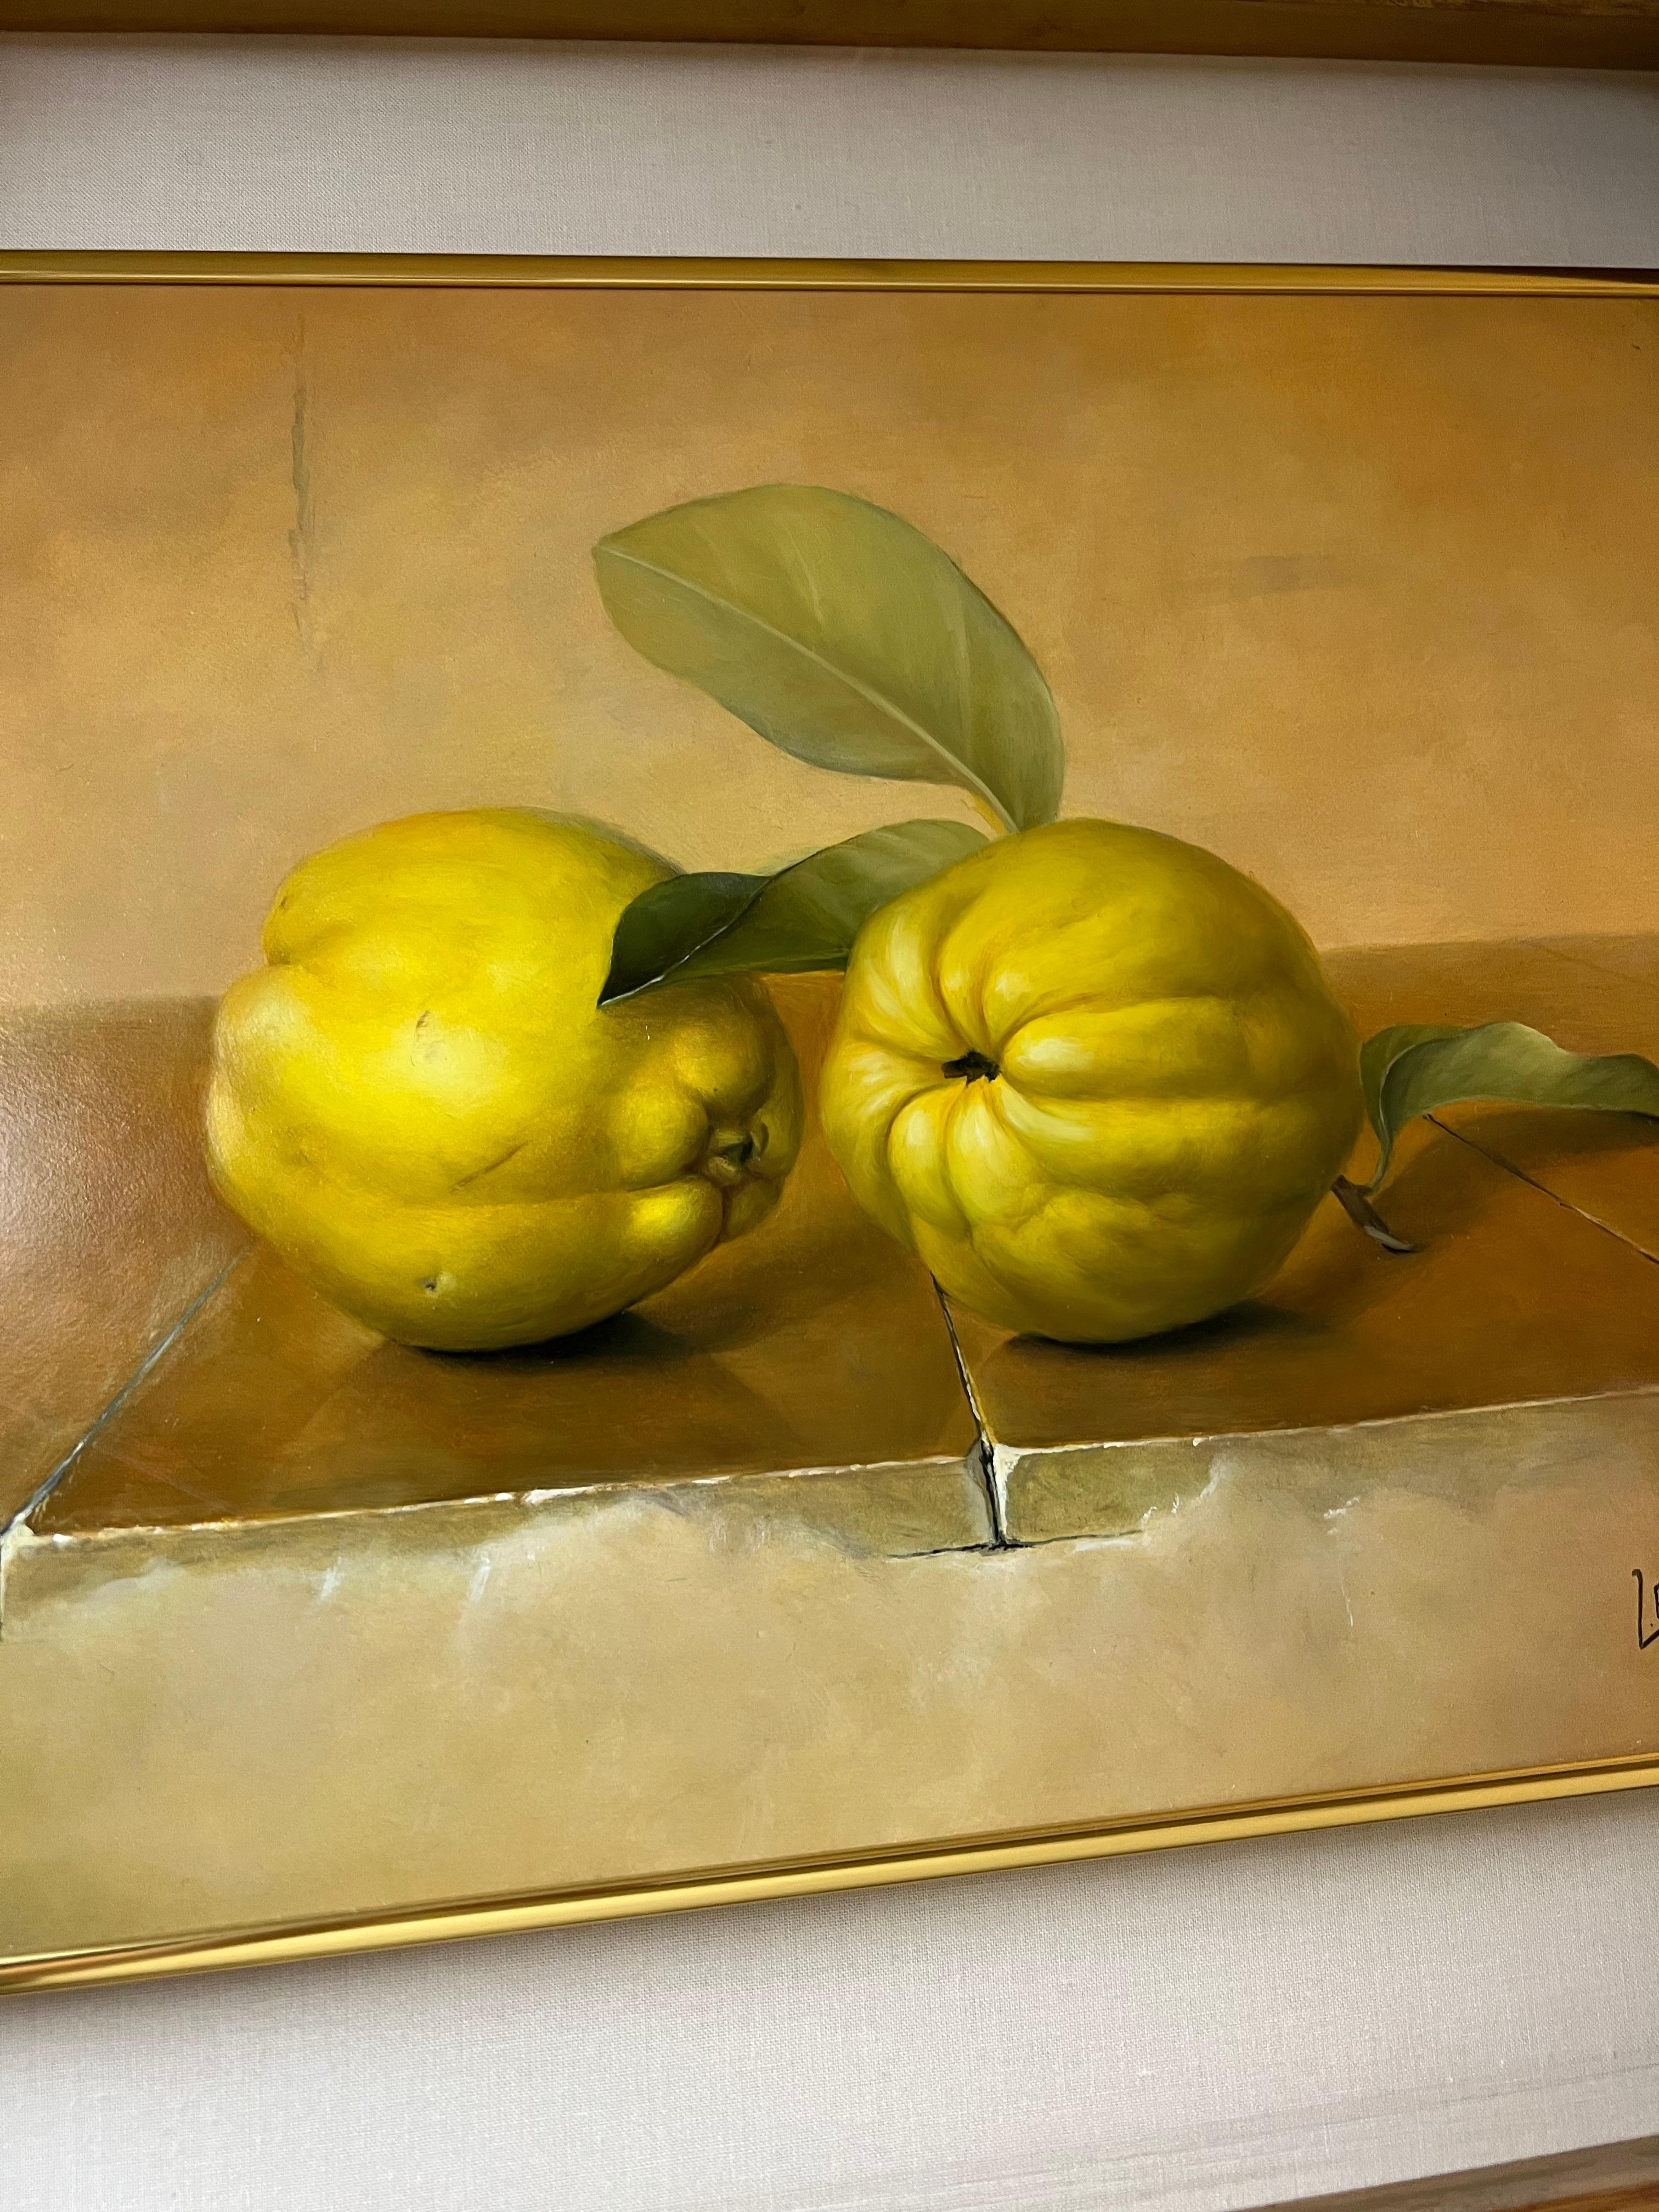 Still Life Of Pears On Tile - Painting by Jose Reina